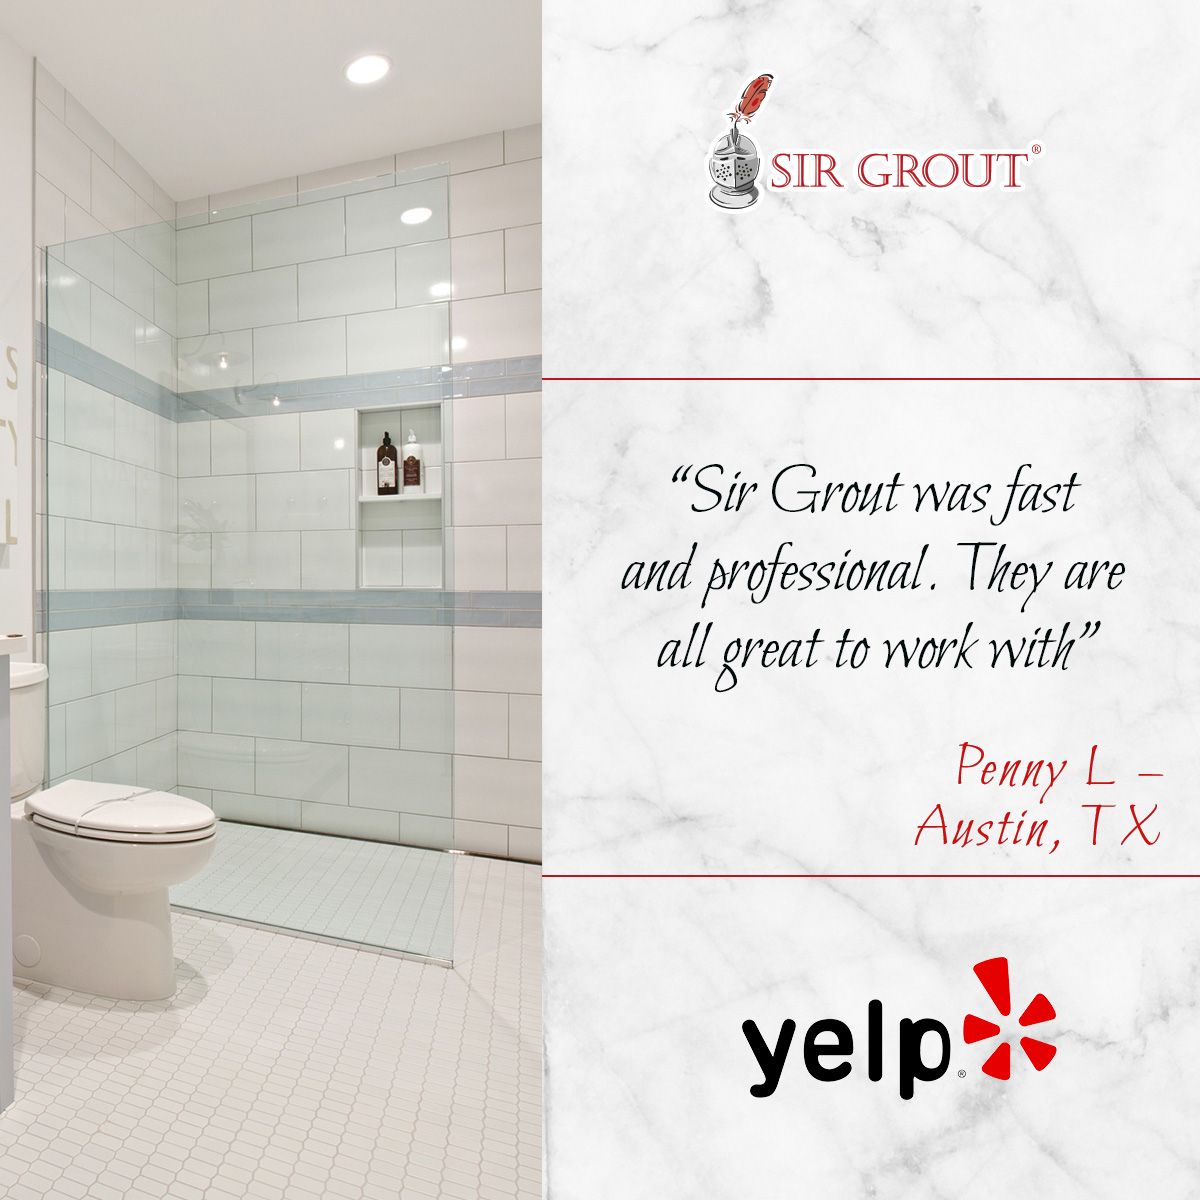 Sir Grout was fast and professional. They are all great to work with.